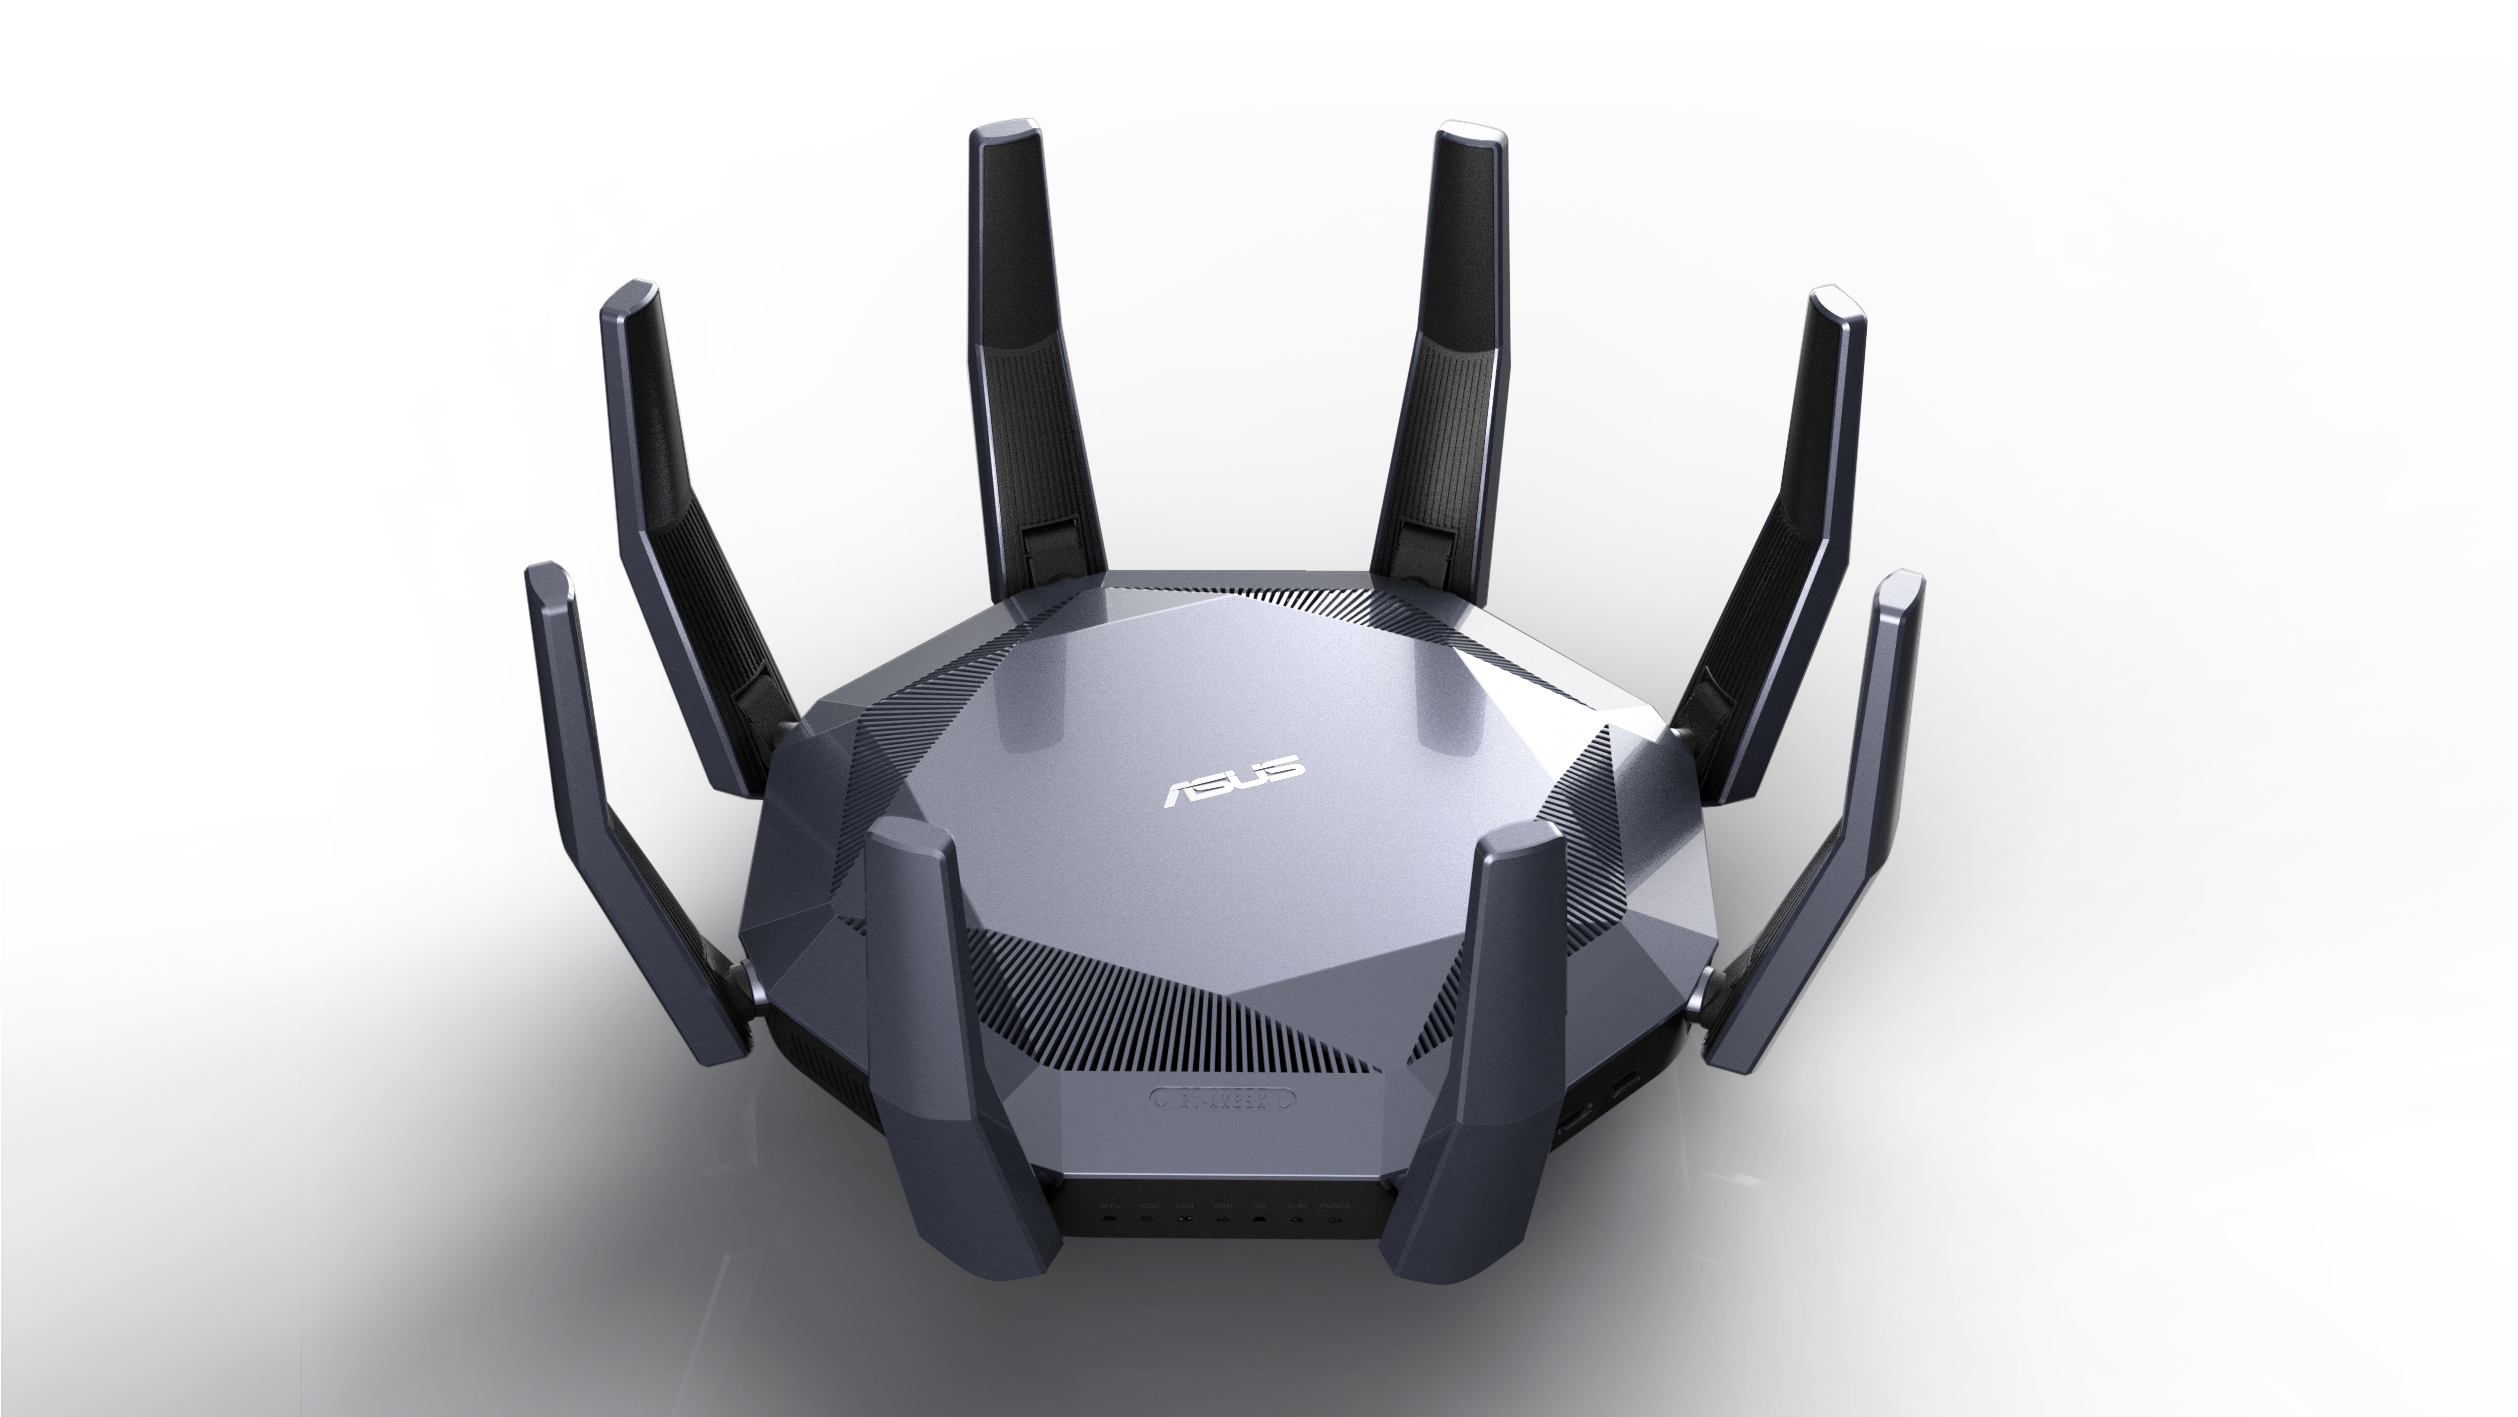 Dual-band Wi-Fi router